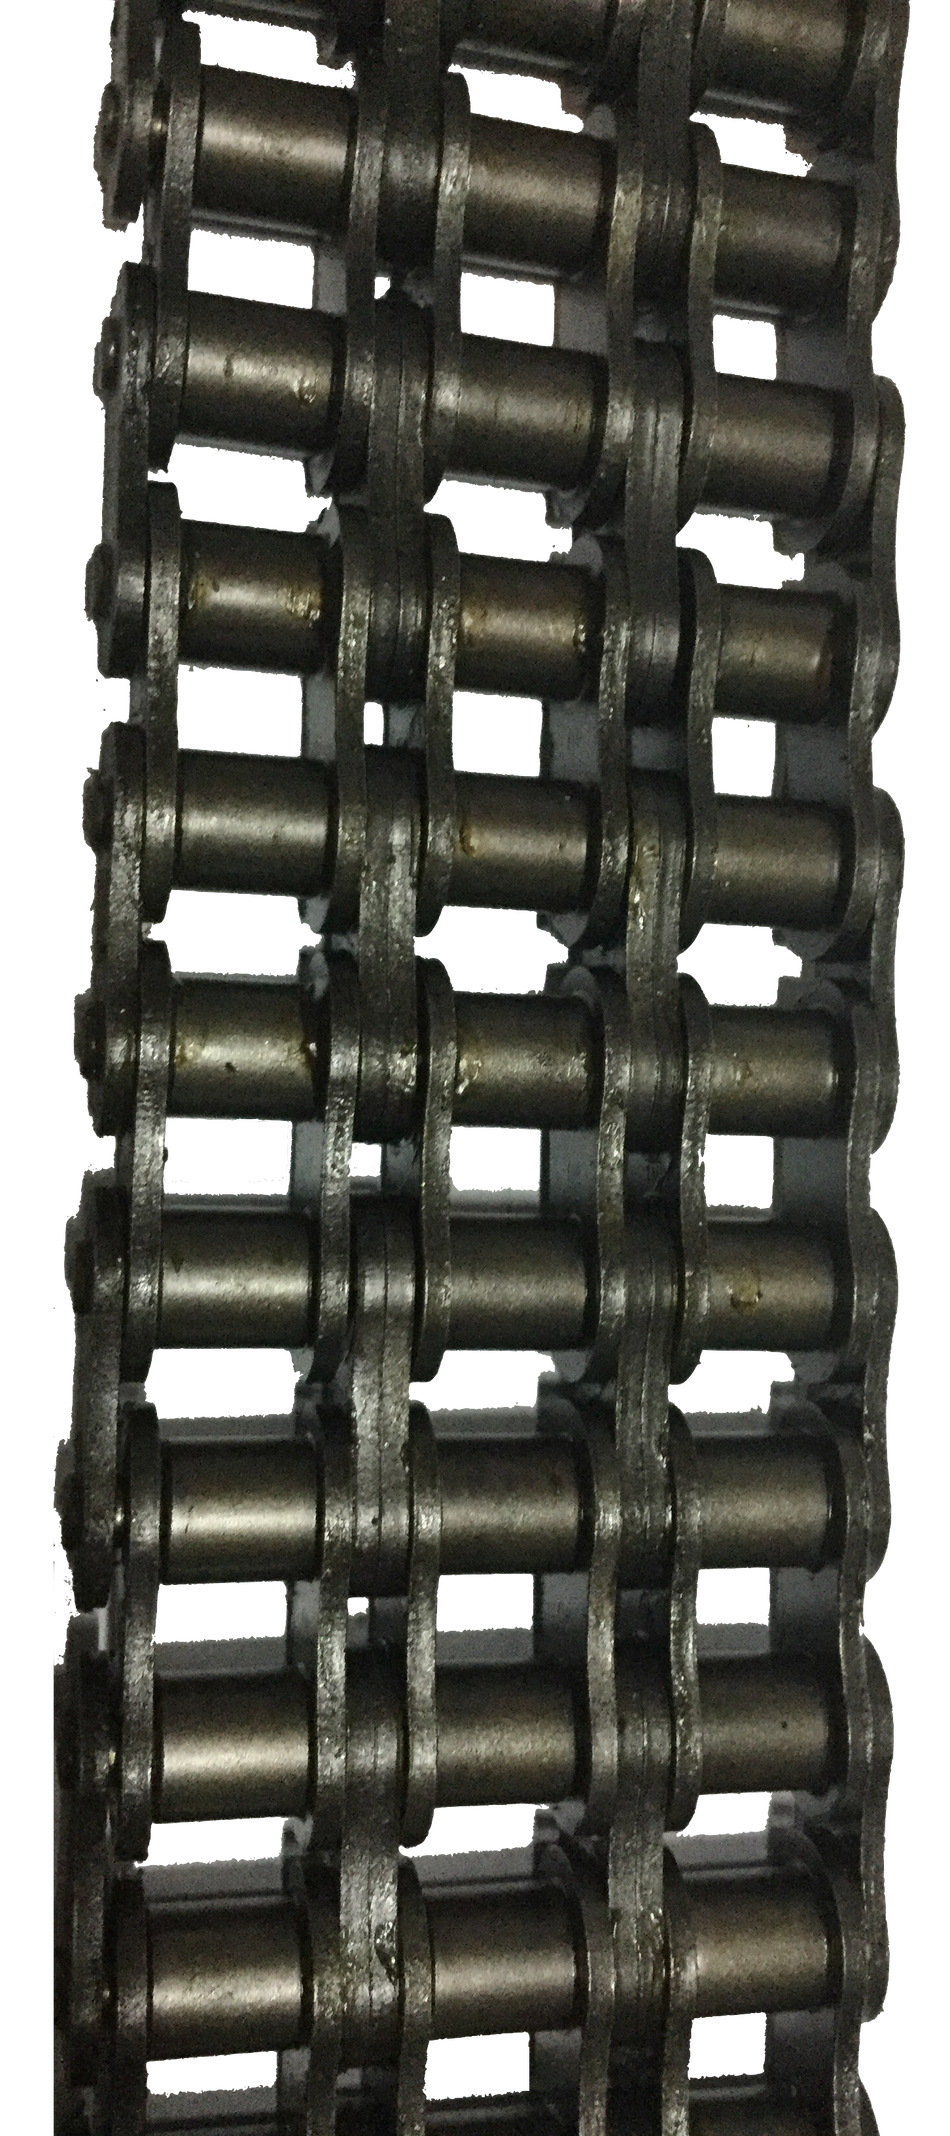 HKK 3-Strand #80 Standard Riveted Roller Chain (1.000" Pitch) - SOLD BY THE FOOT - Froedge Machine & Supply Co., Inc.